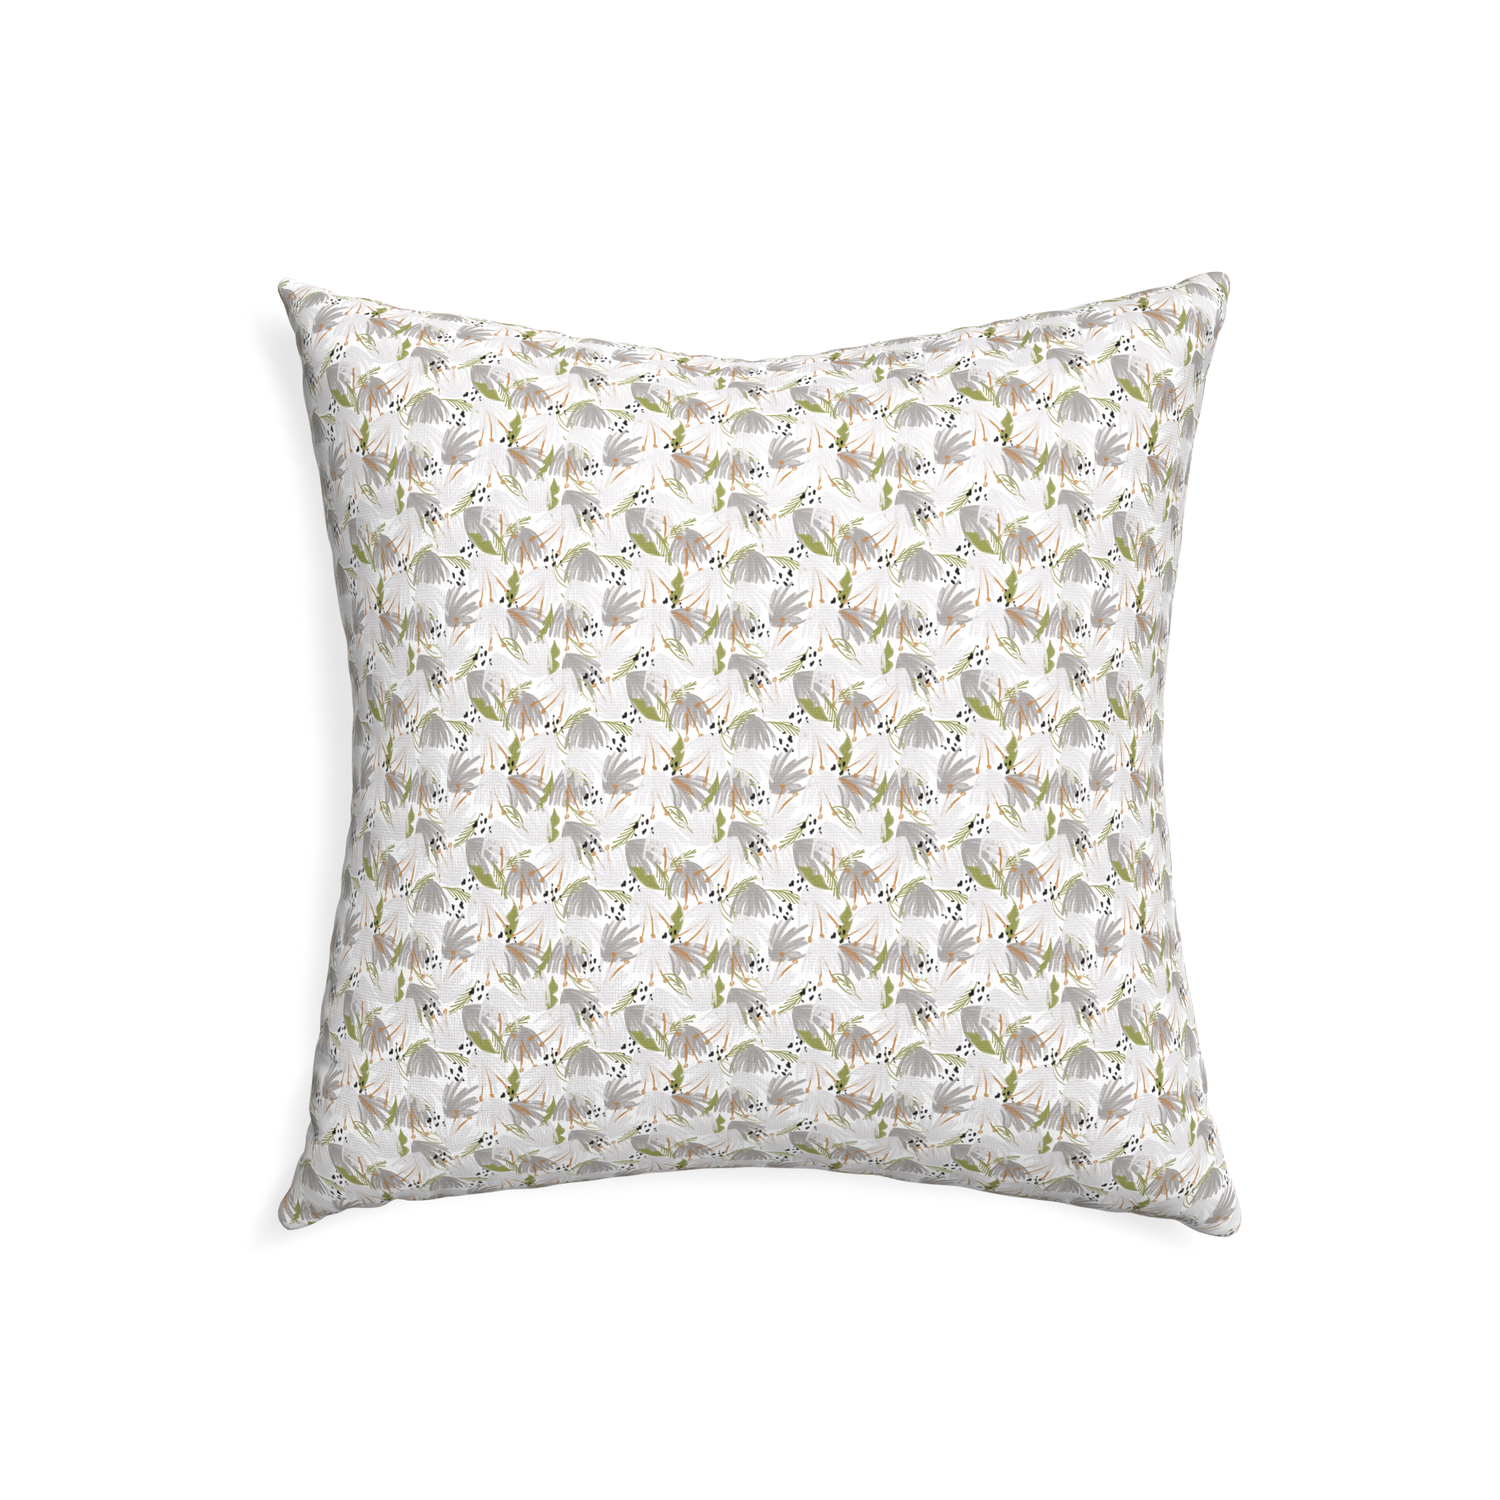 22-square eden grey custom grey floralpillow with none on white background